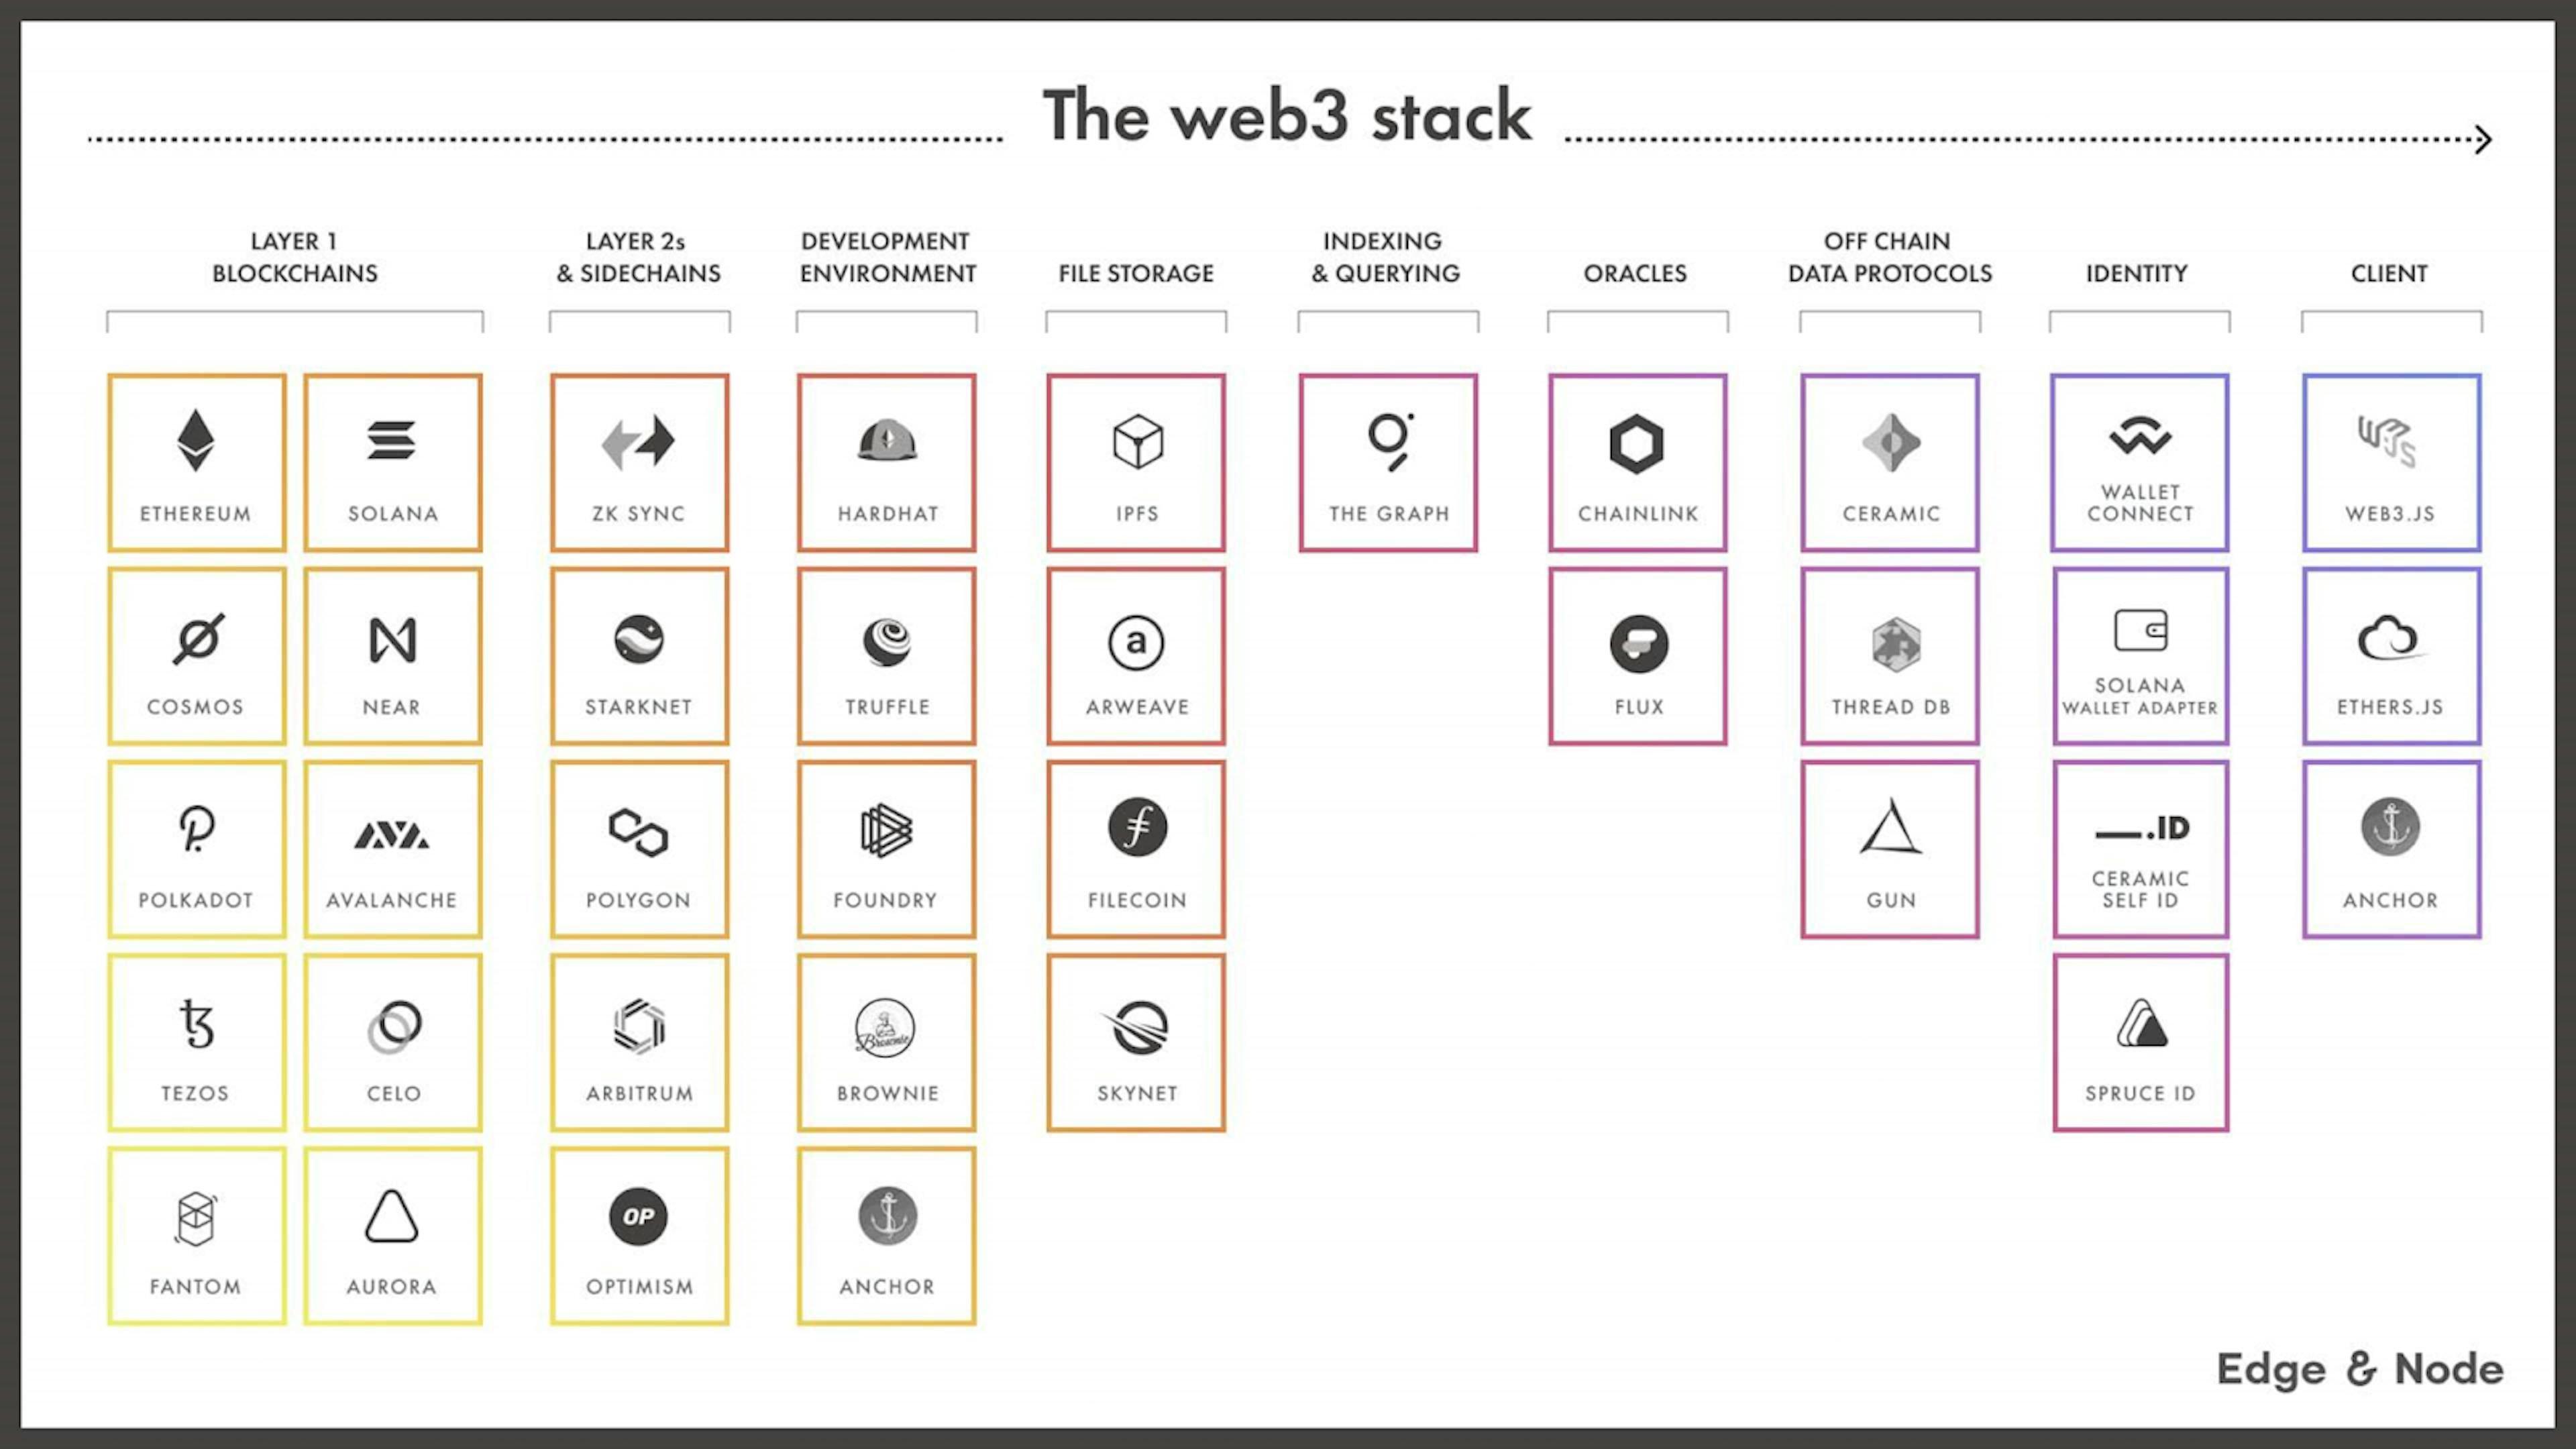 Web3 stack. Image credit by Edge&Node